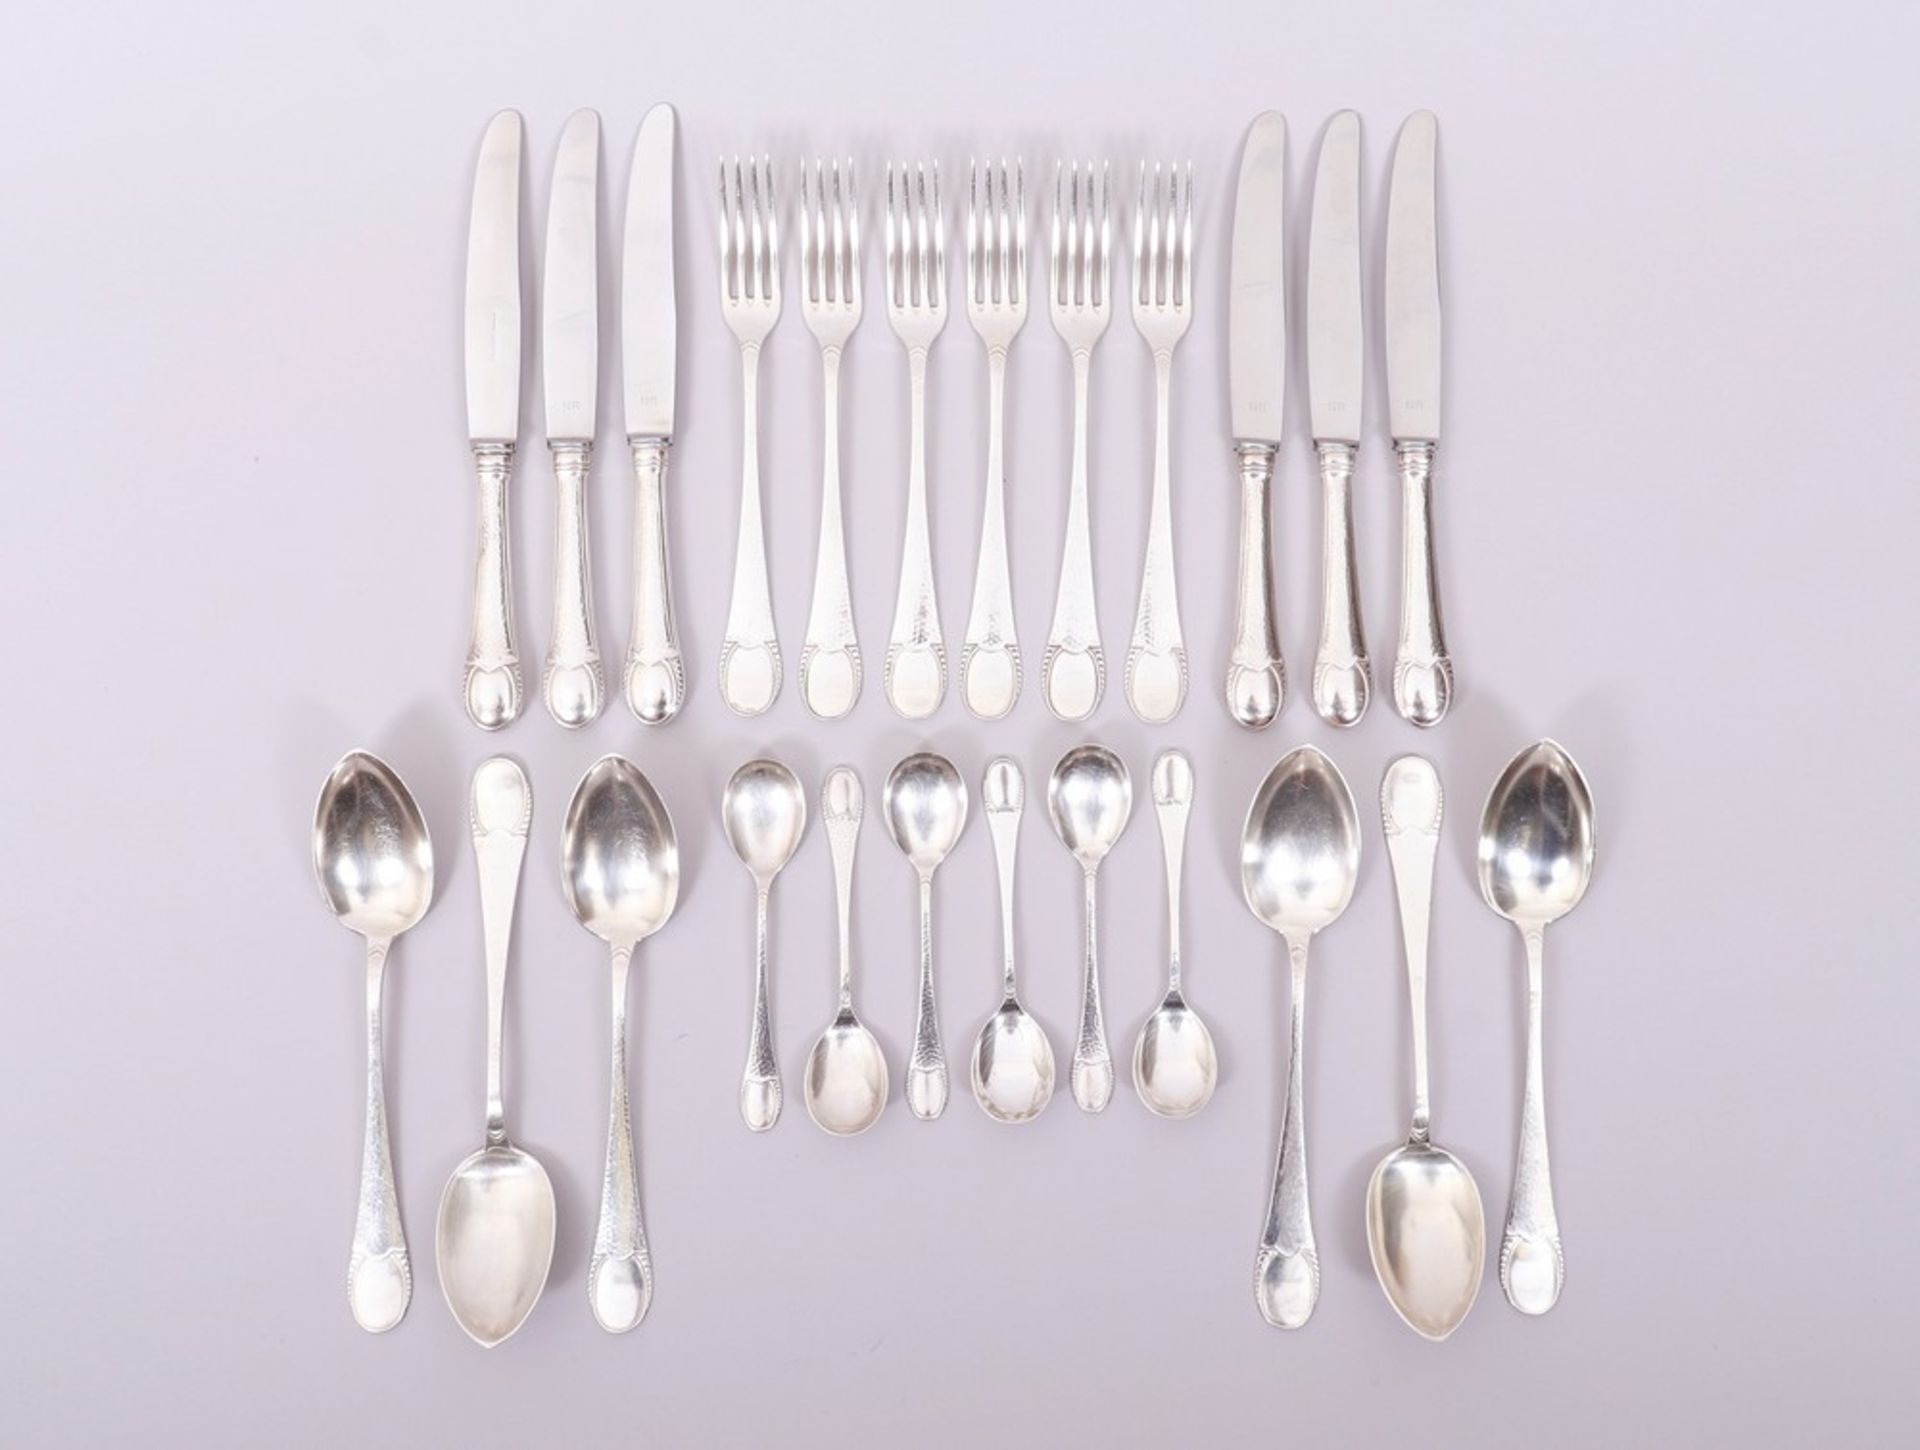 Cutlery for 6 people, 800 silver, Robbe & Berking, Flensburg, 1st half 20th C., 24 pieces